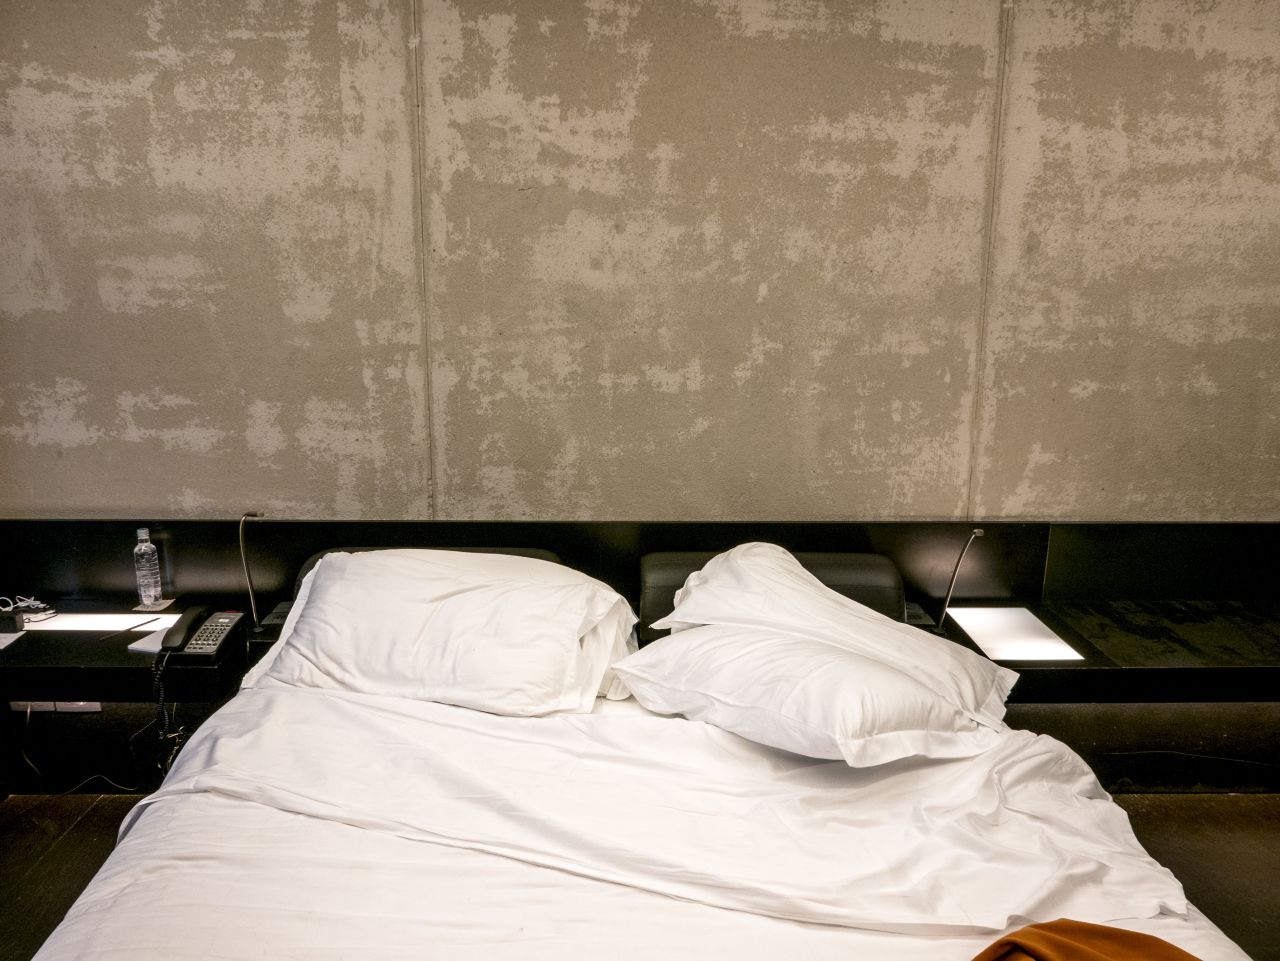 At first it is hard to see much difference, but then details emerge -- imprints on a bed showing which side a guest slept on; a bedside lamp left on; pillows rumpled, tossed to the floor or neatly stacked. 